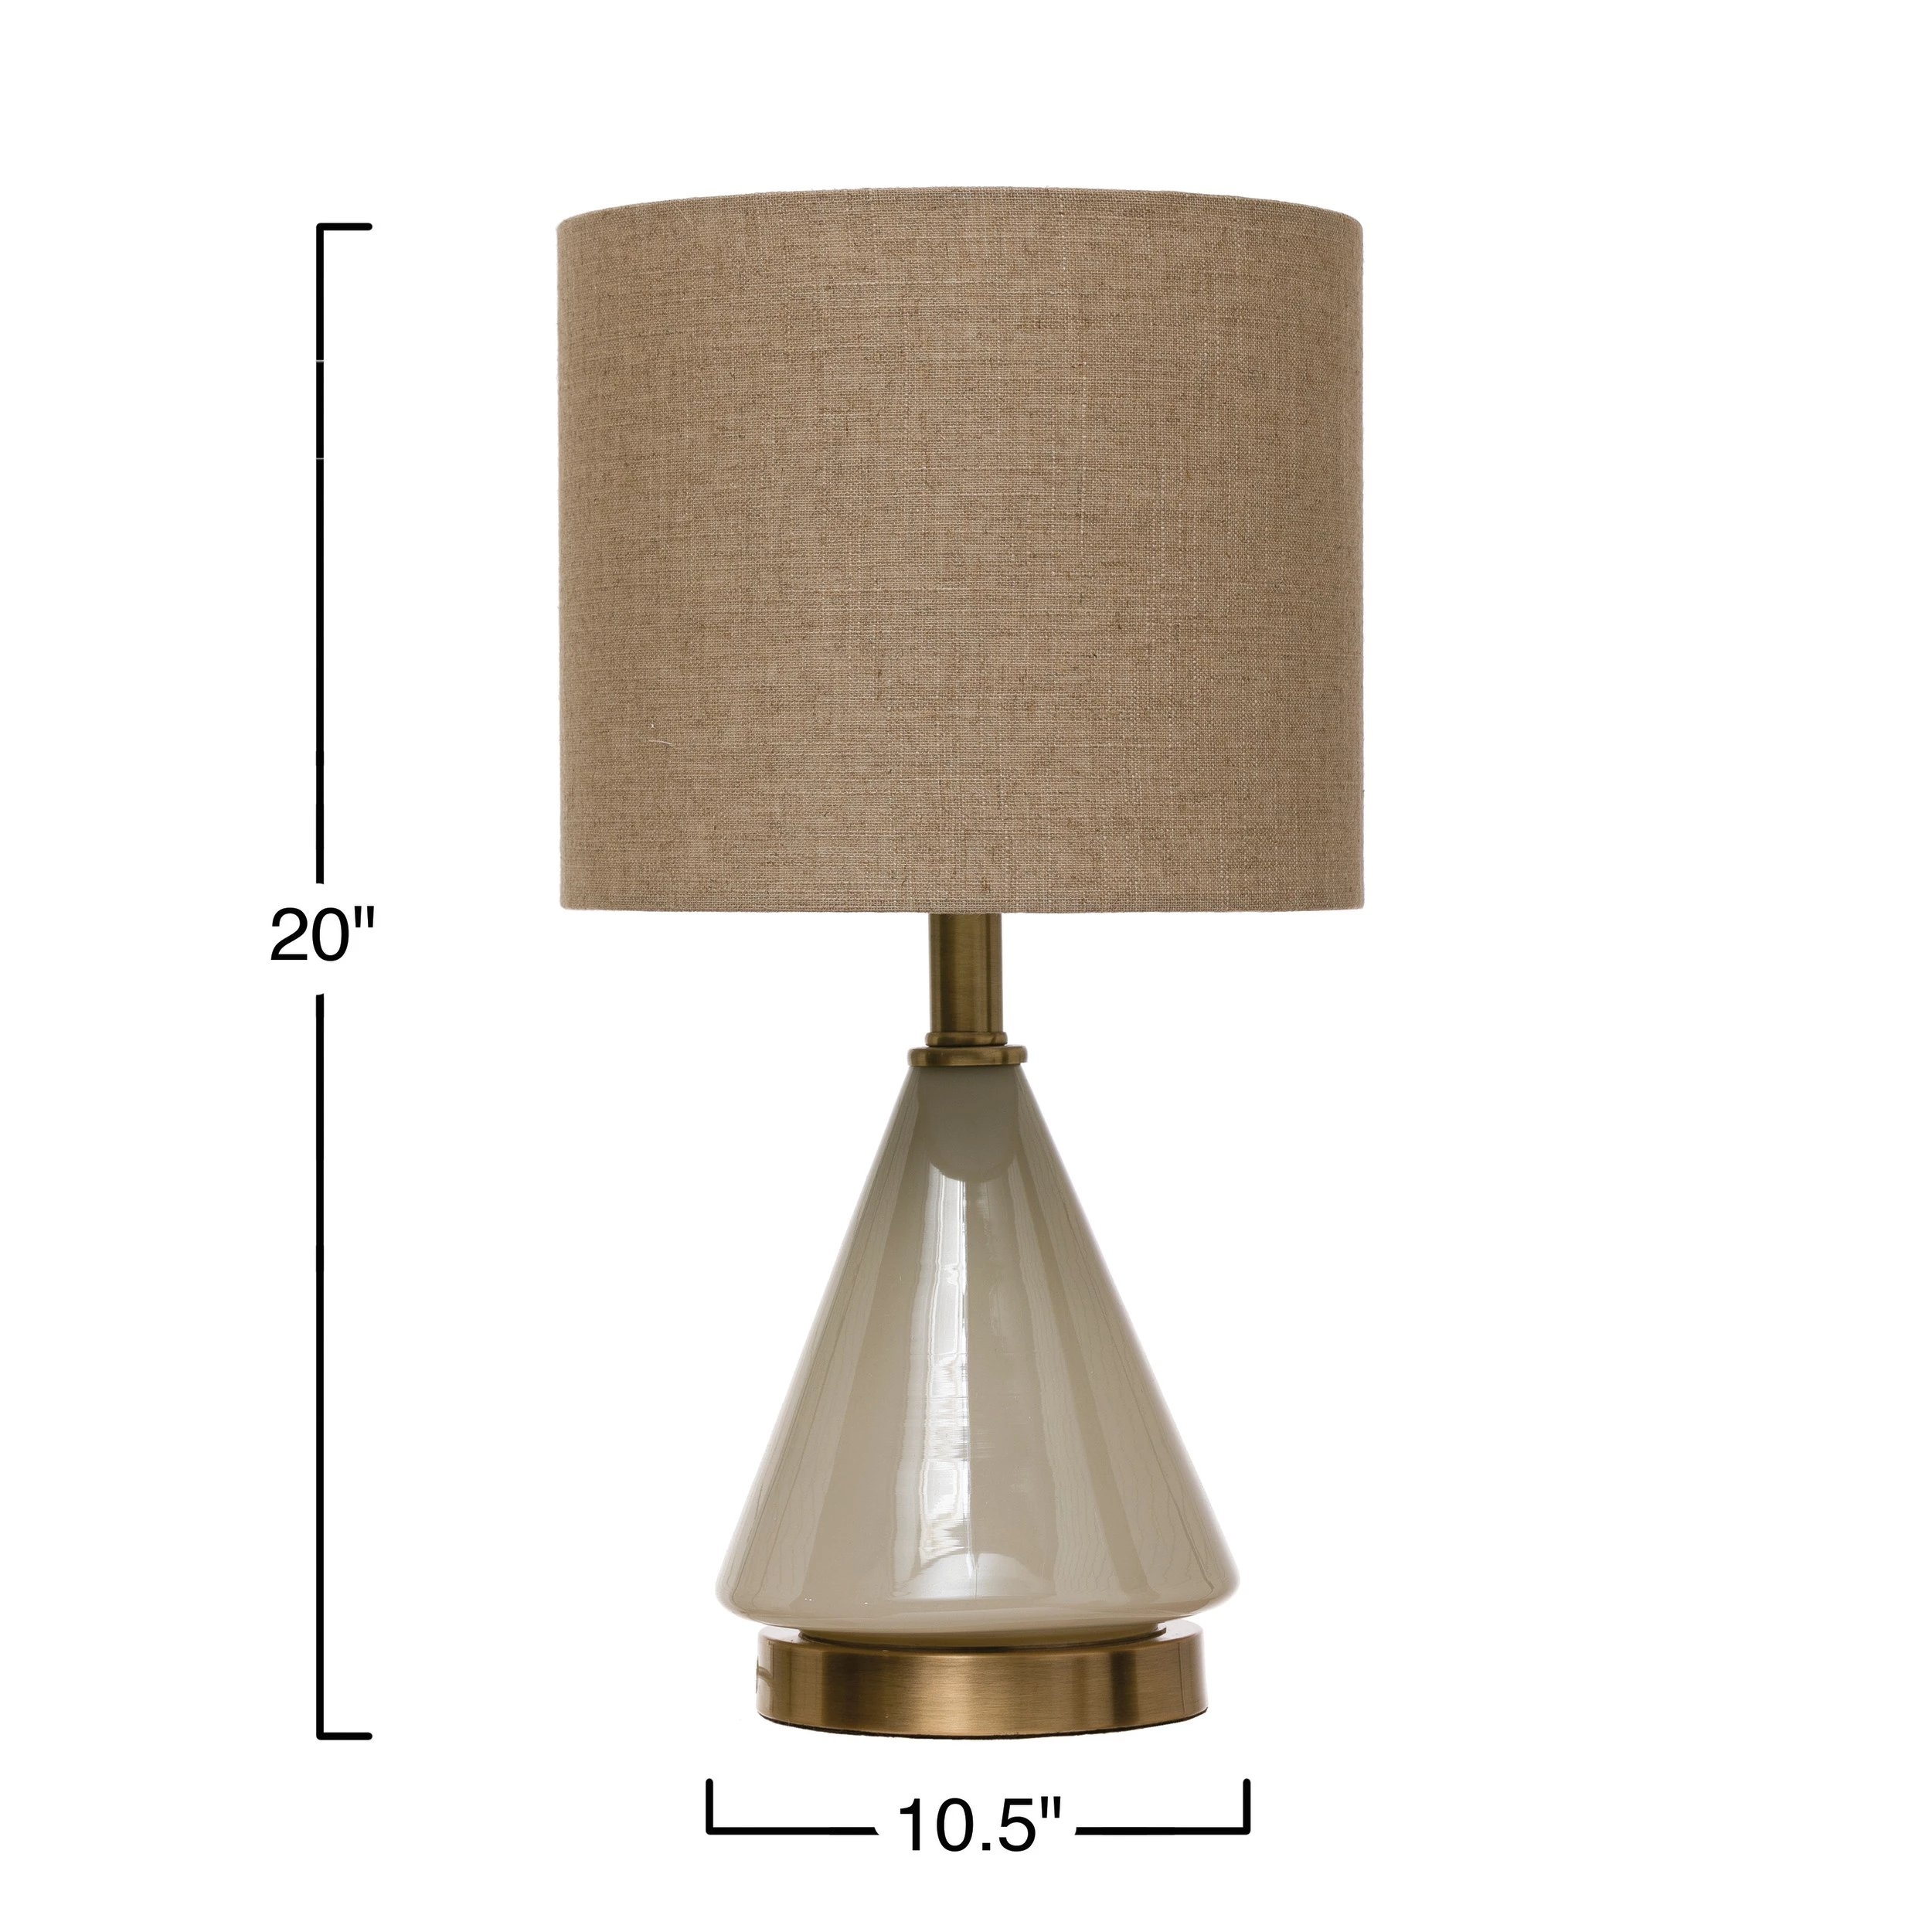 20 in. Glass Table Lamp with Cream Linen Shade with Inline Switch - Image 1